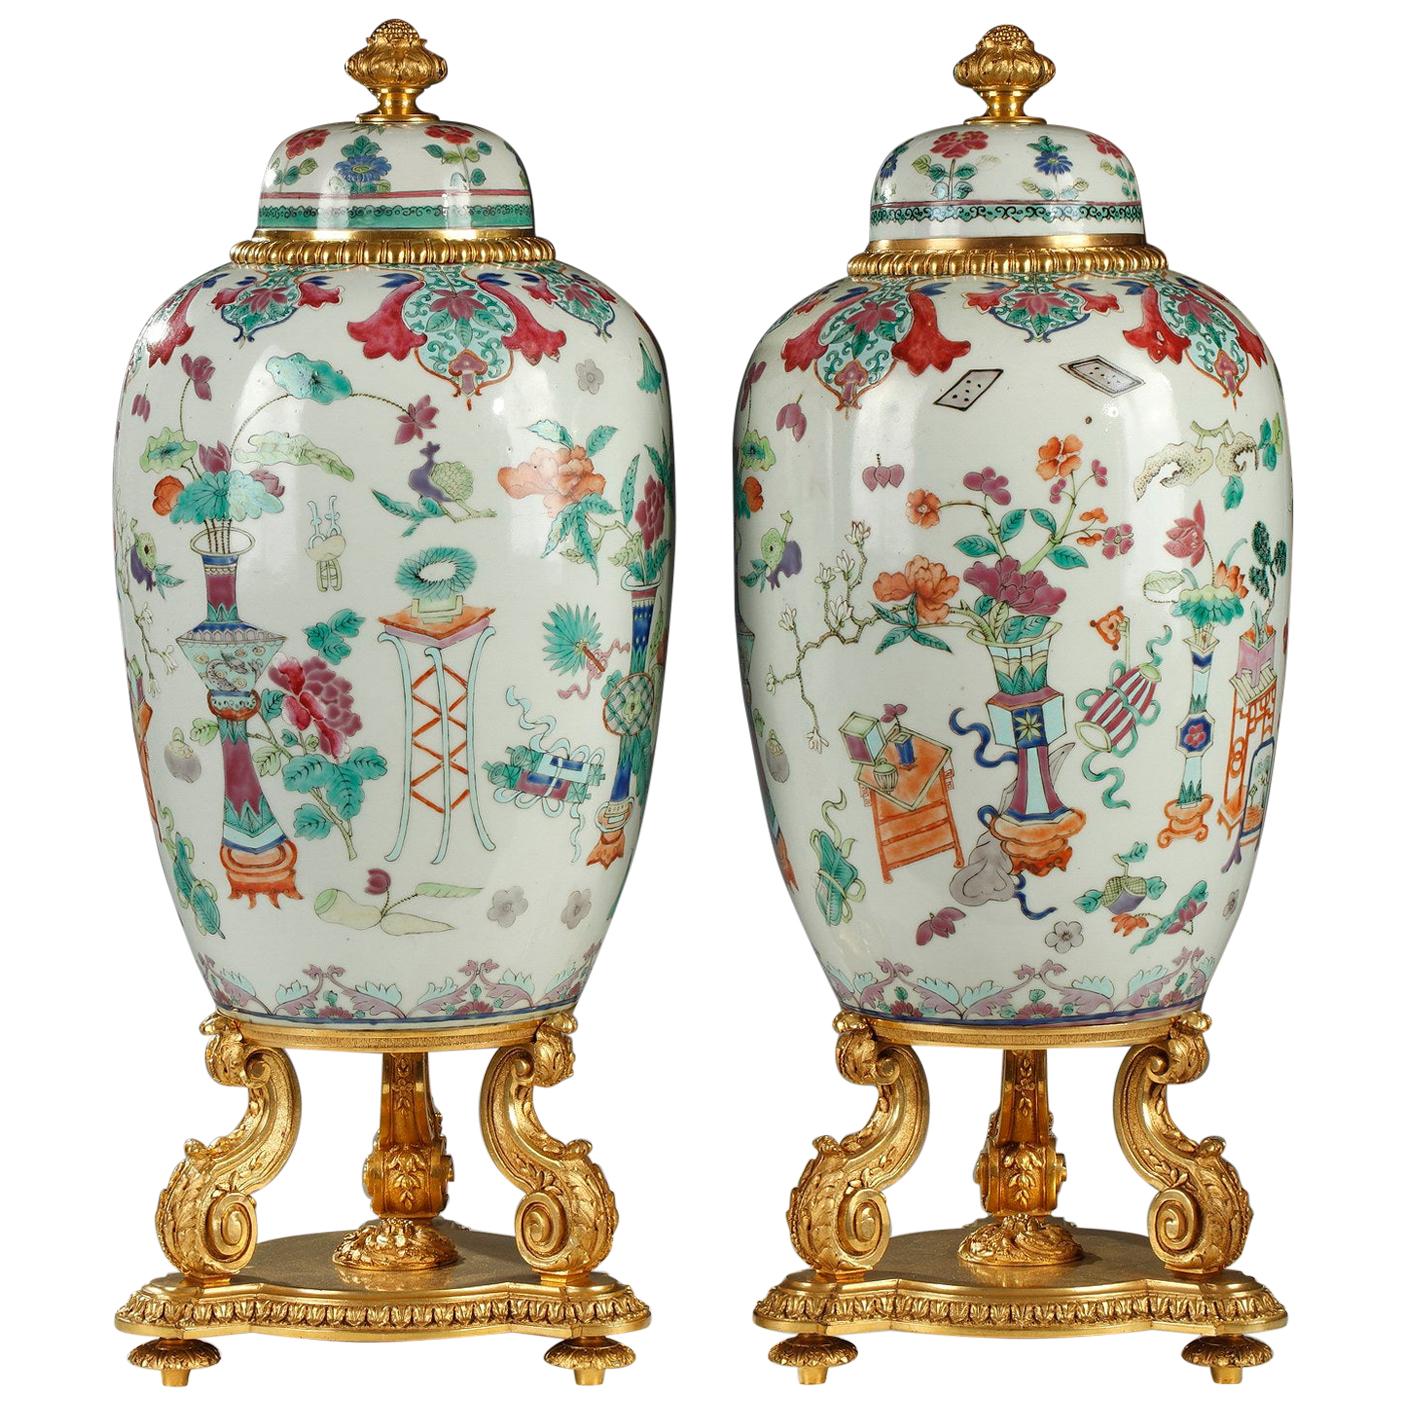 Pair of Covered Jars Attributed to l'Escalier de Cristal, France, Circa 1860